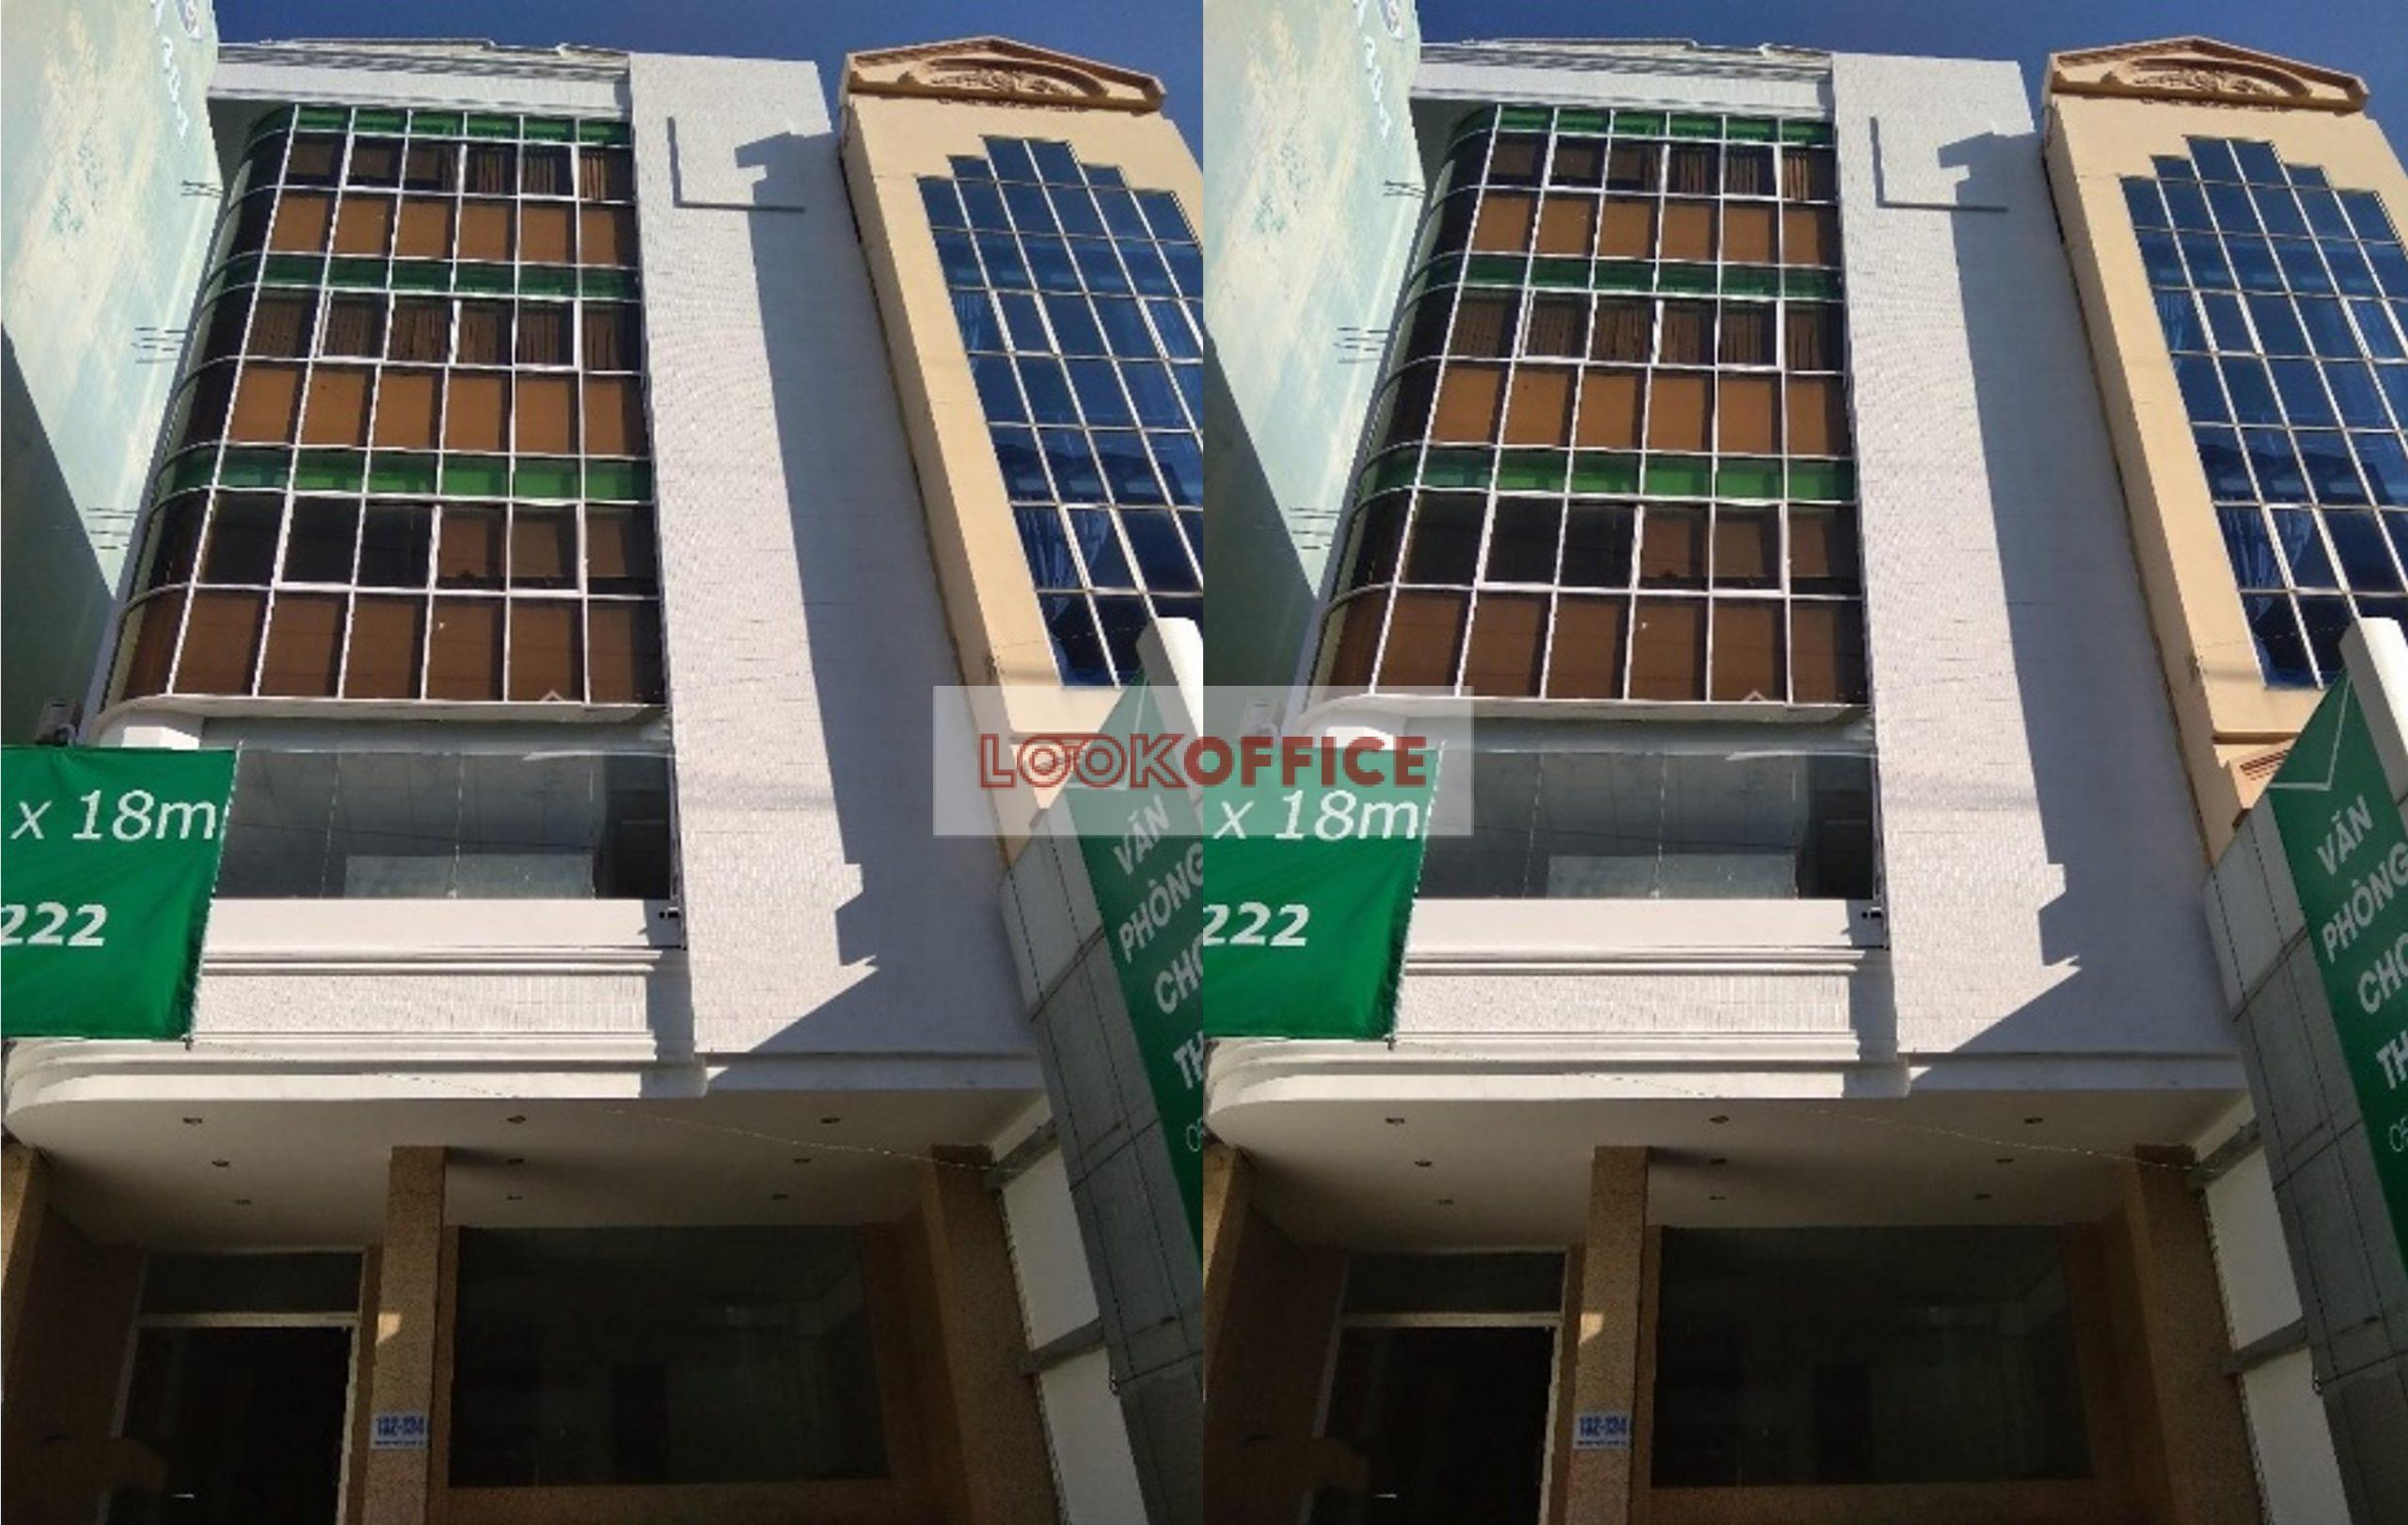 32-134 dien bien phu office for lease for rent in district 1 ho chi minh